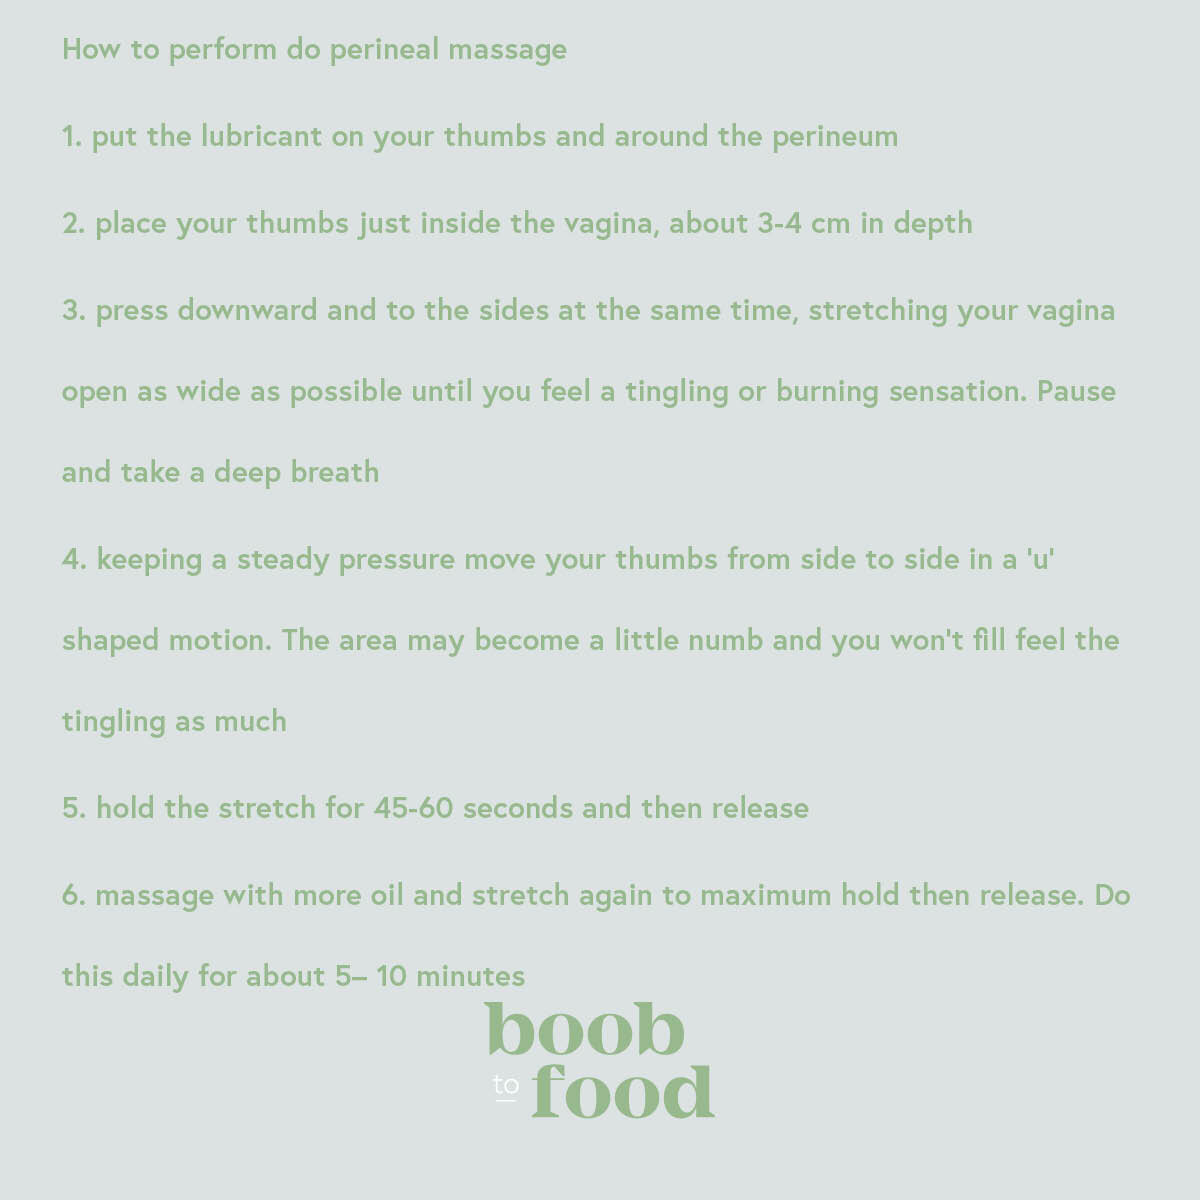 perineal massage boob to food 2